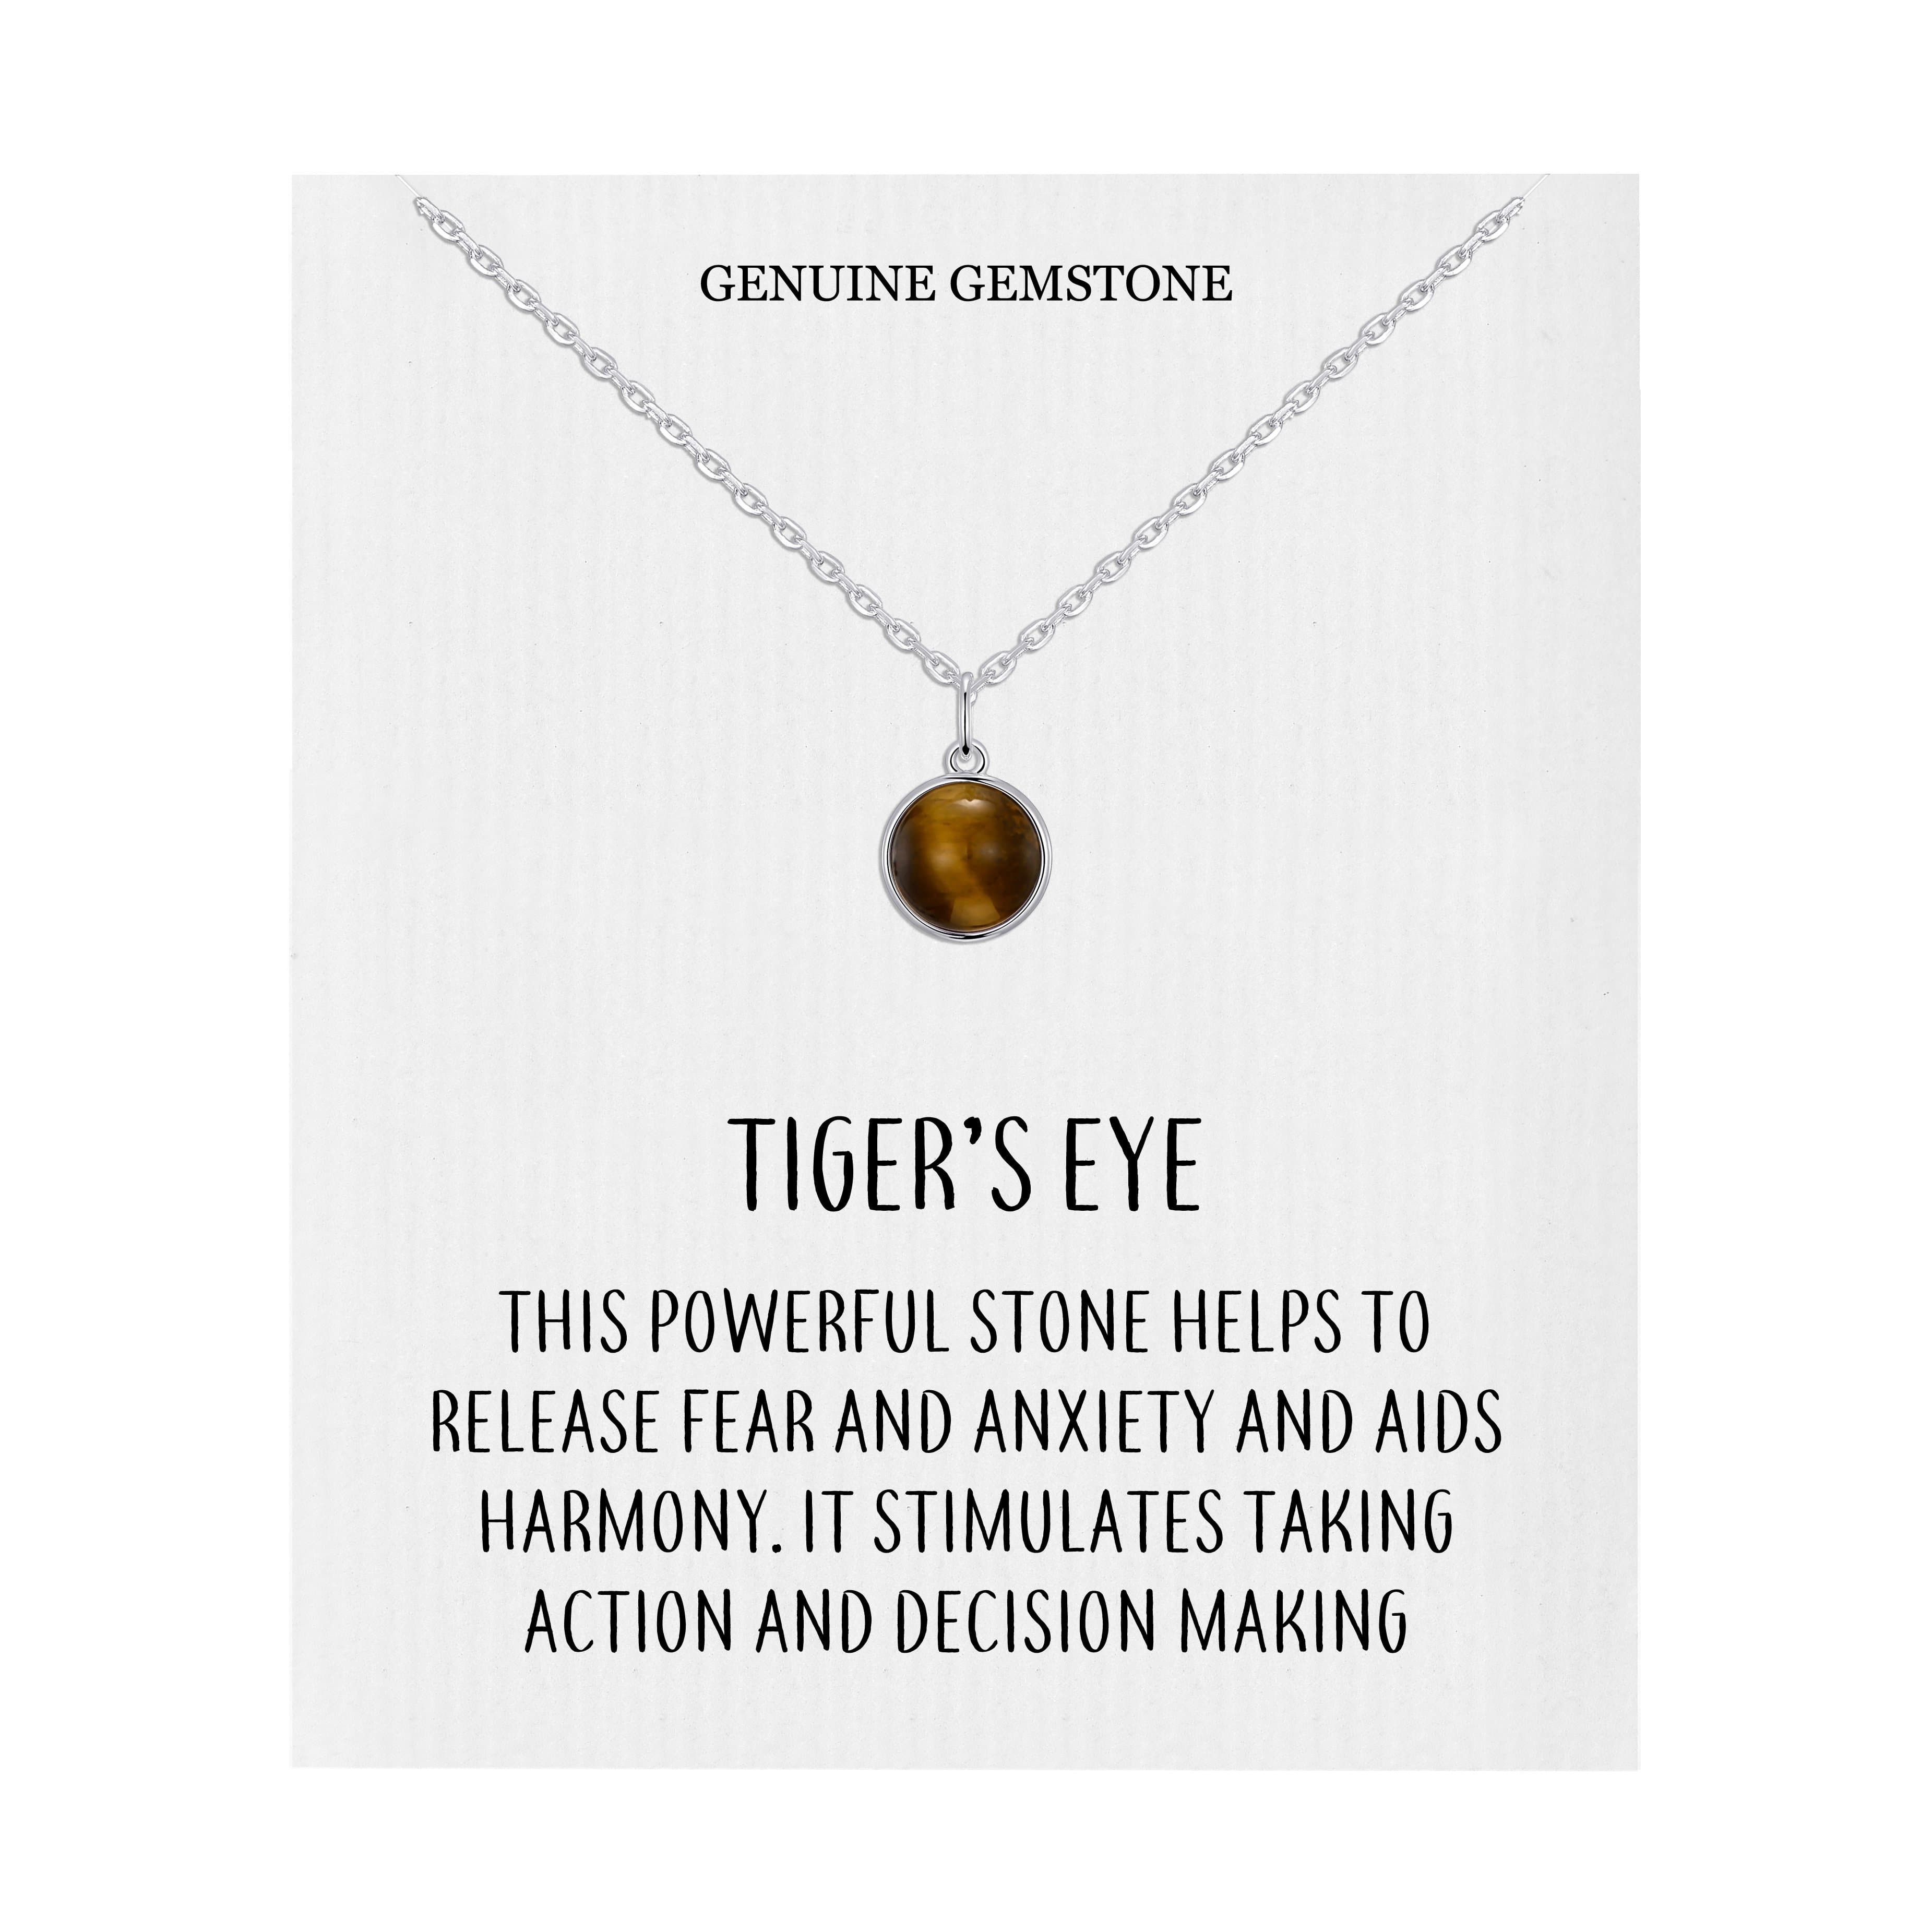 Tiger's Eye Necklace with Quote Card by Philip Jones Jewellery